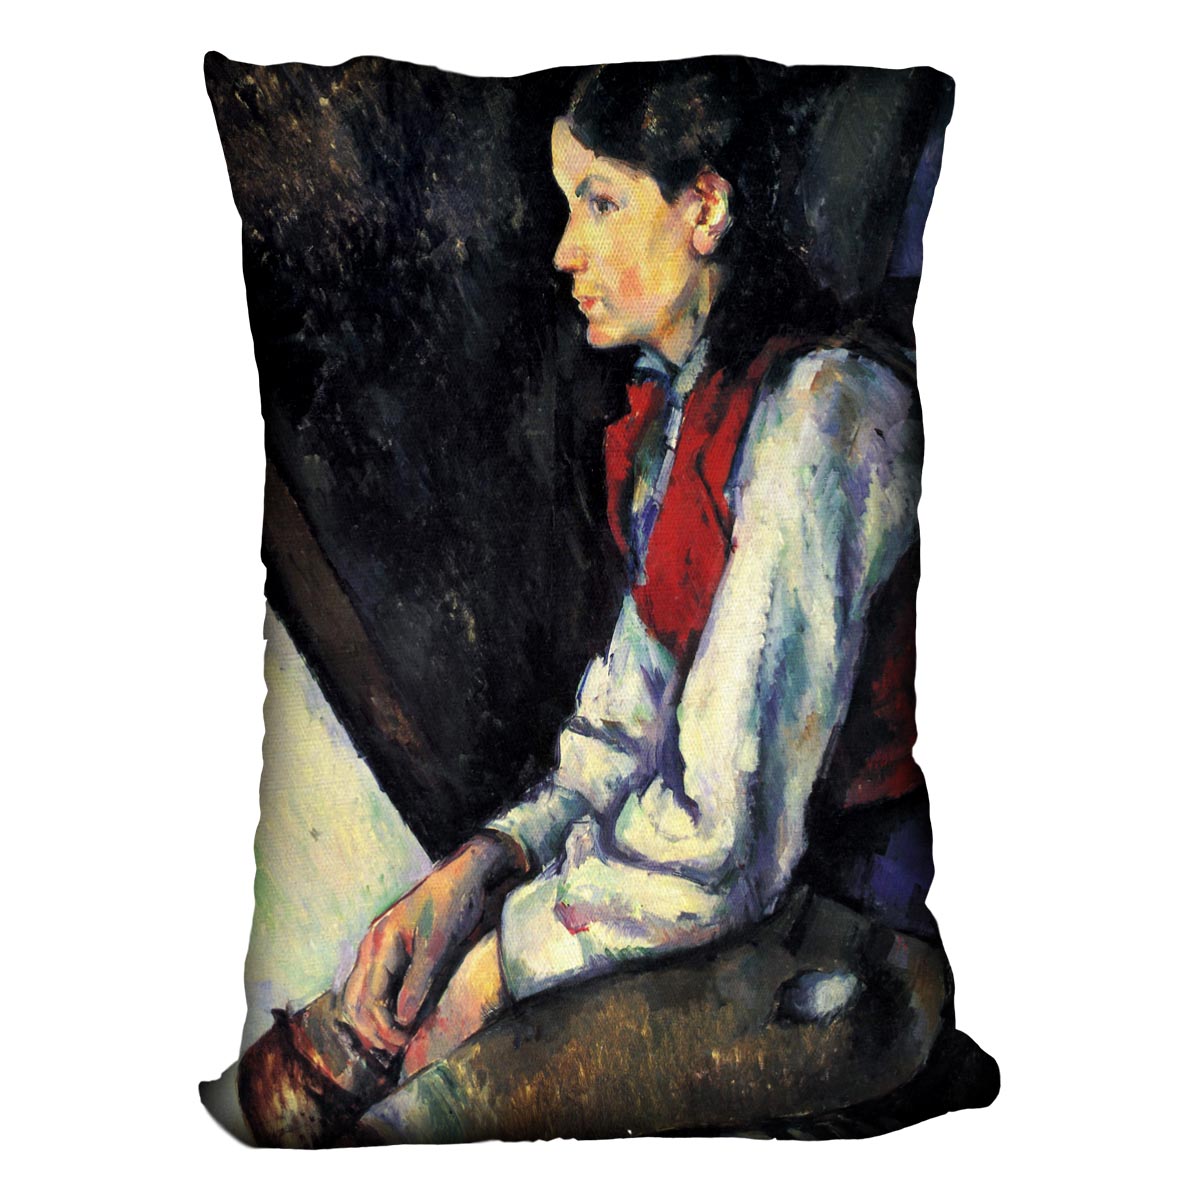 Boy with Red Vest by Cezanne Cushion